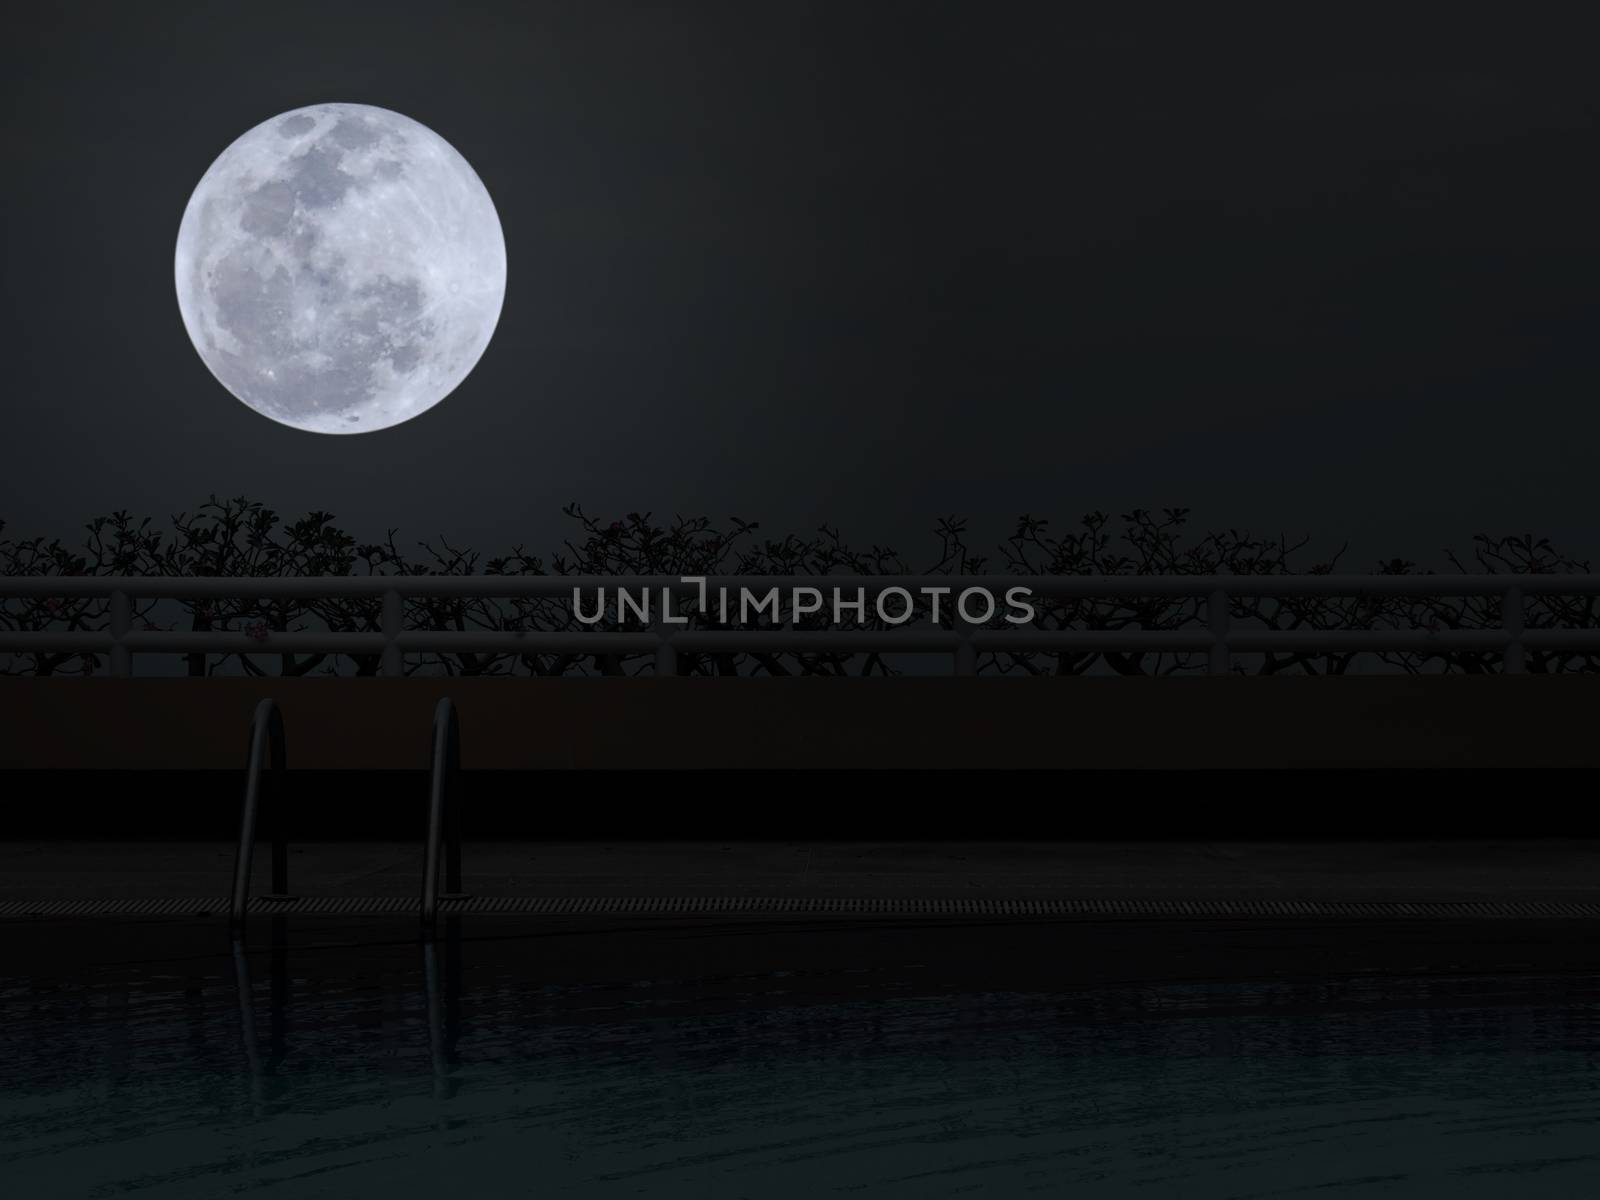 Swimming pool at night with full moon in darkness sky